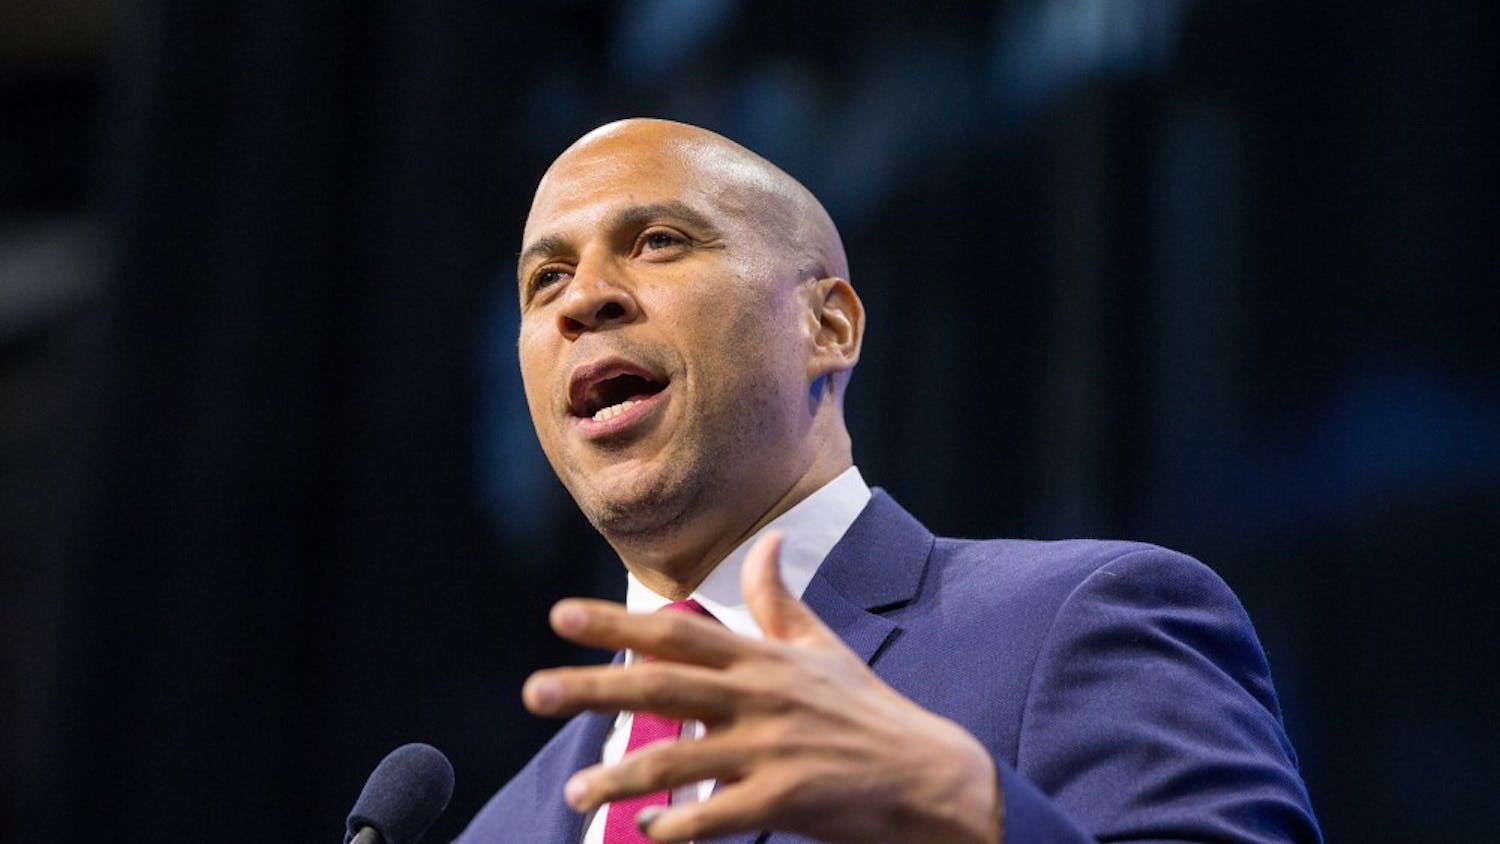 Democratic presidential candidate Sen. Cory Booker (D-NJ) speaks at the New Hampshire Democratic Party Convention at the SNHU Arena Sept. 7 in Manchester, New Hampshire.